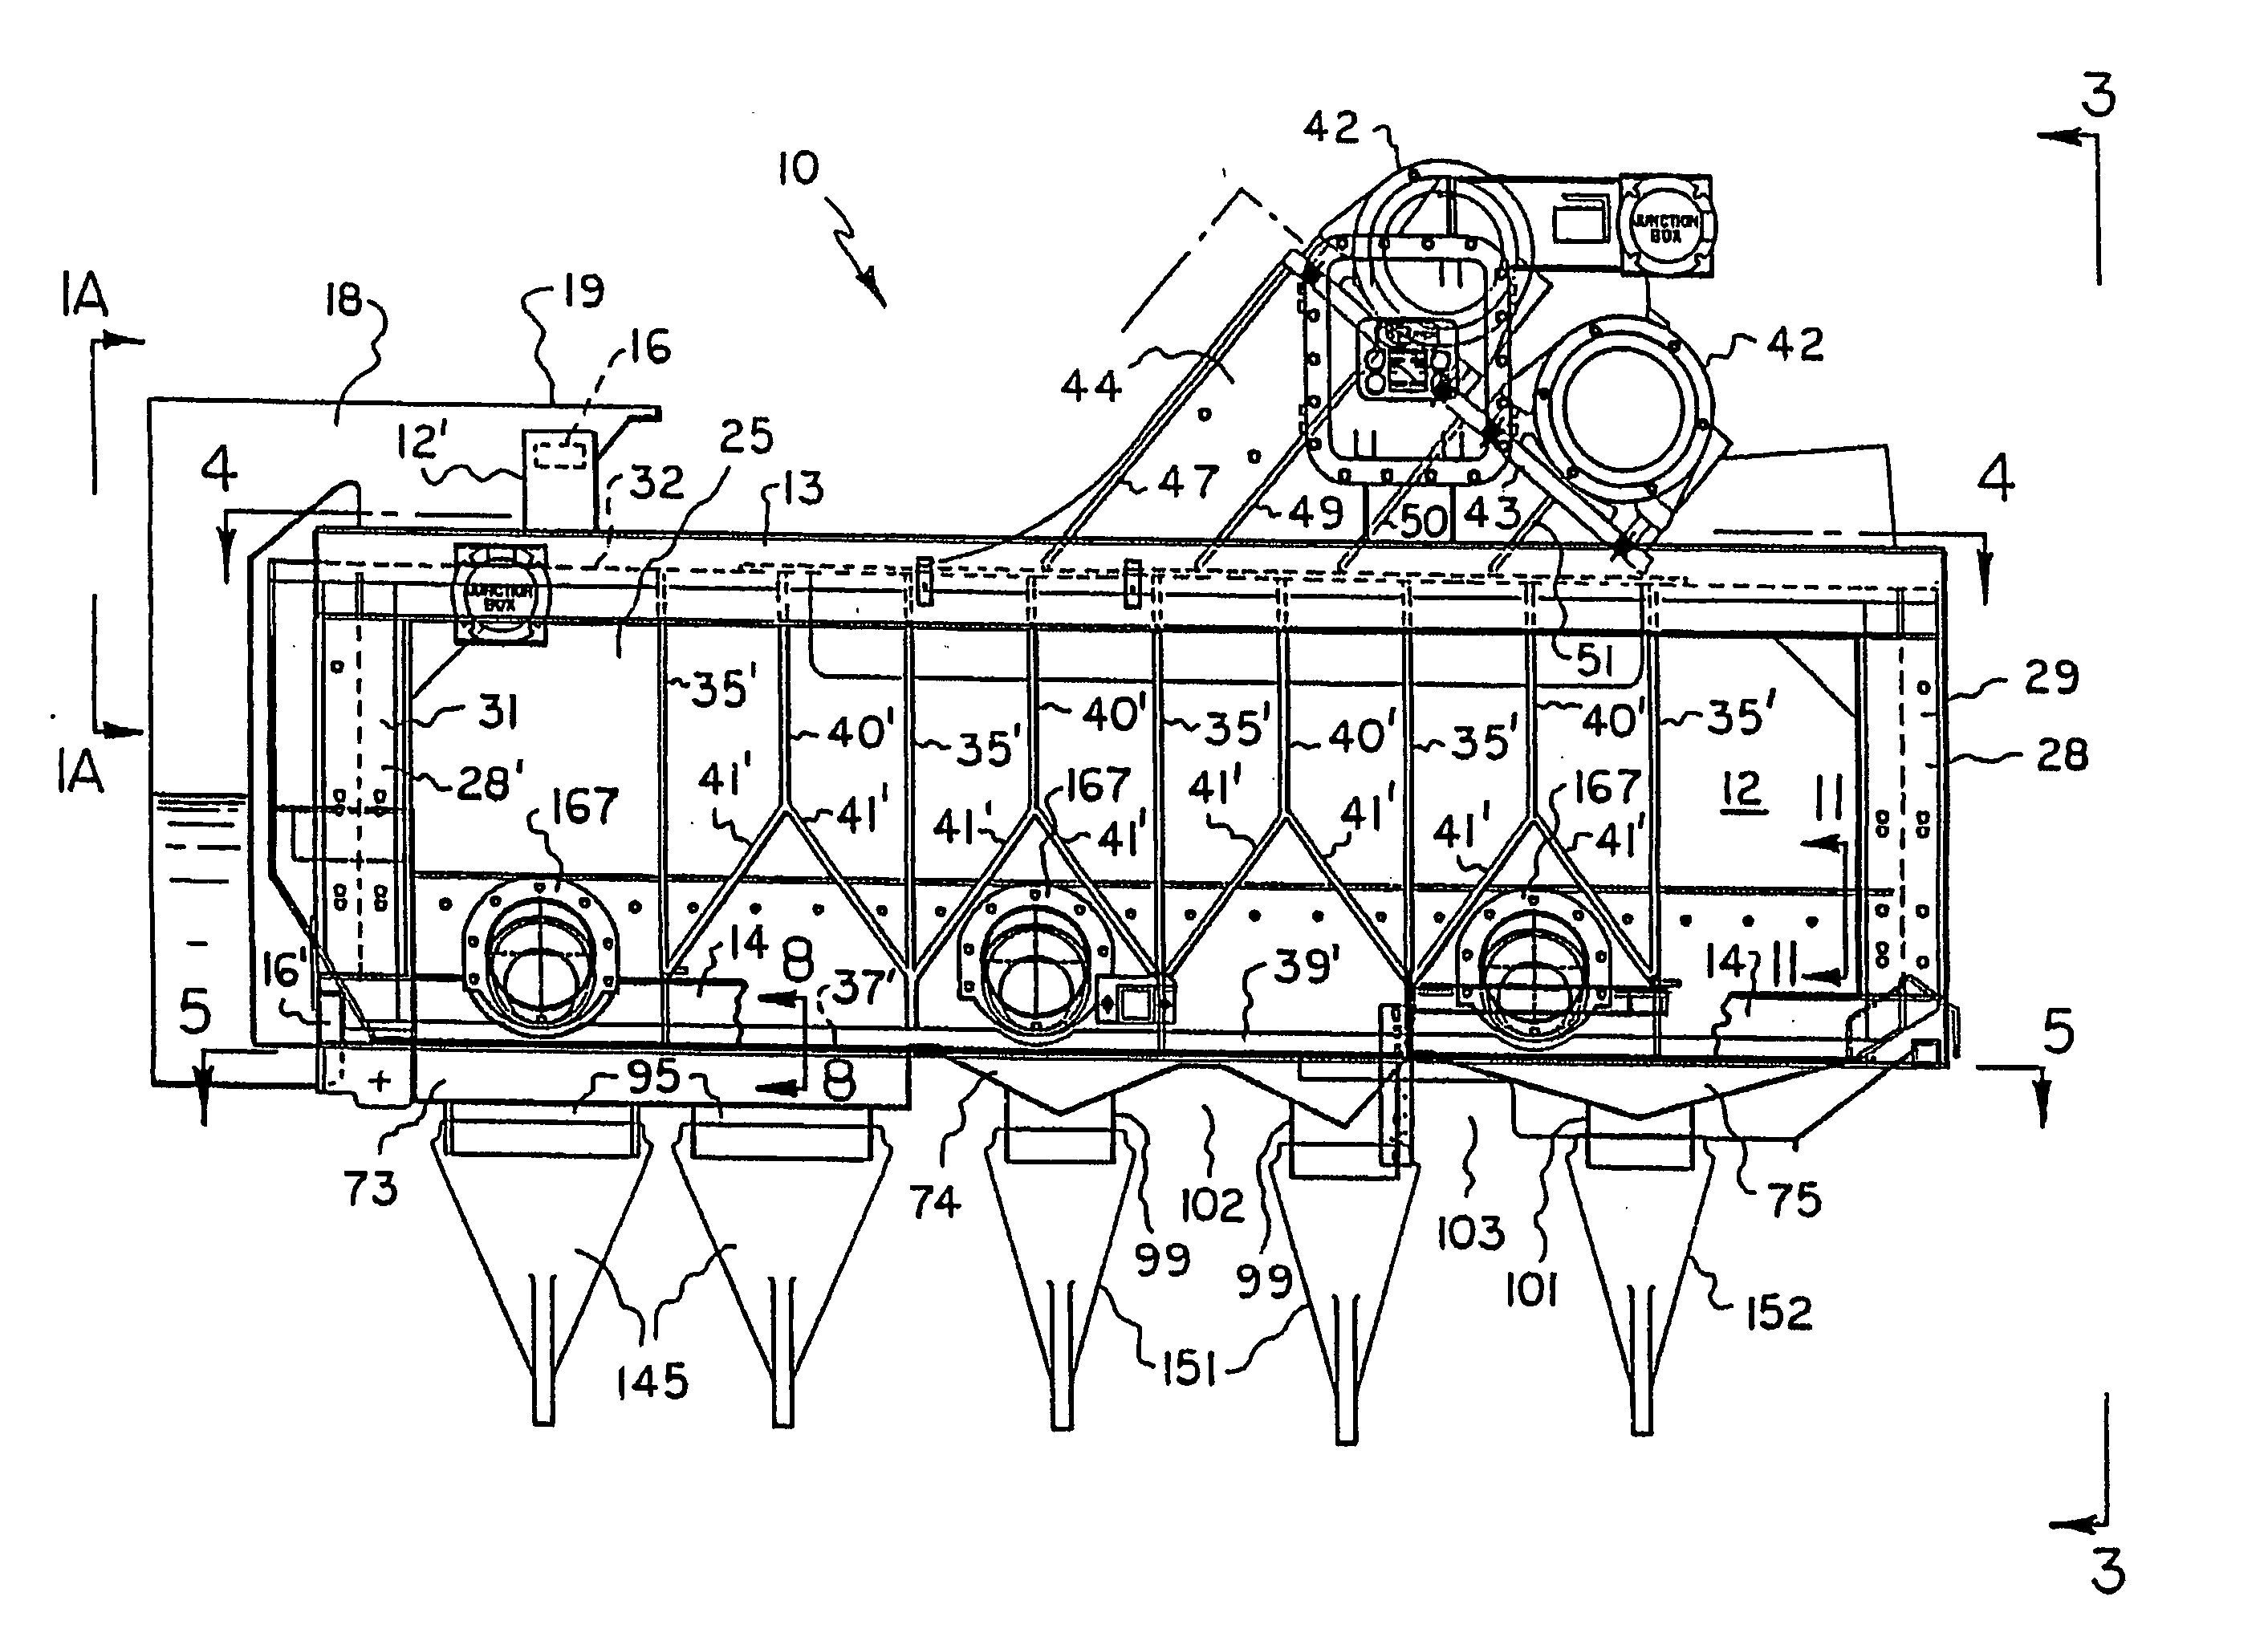 Vibratory screen assembly and method of manufacture